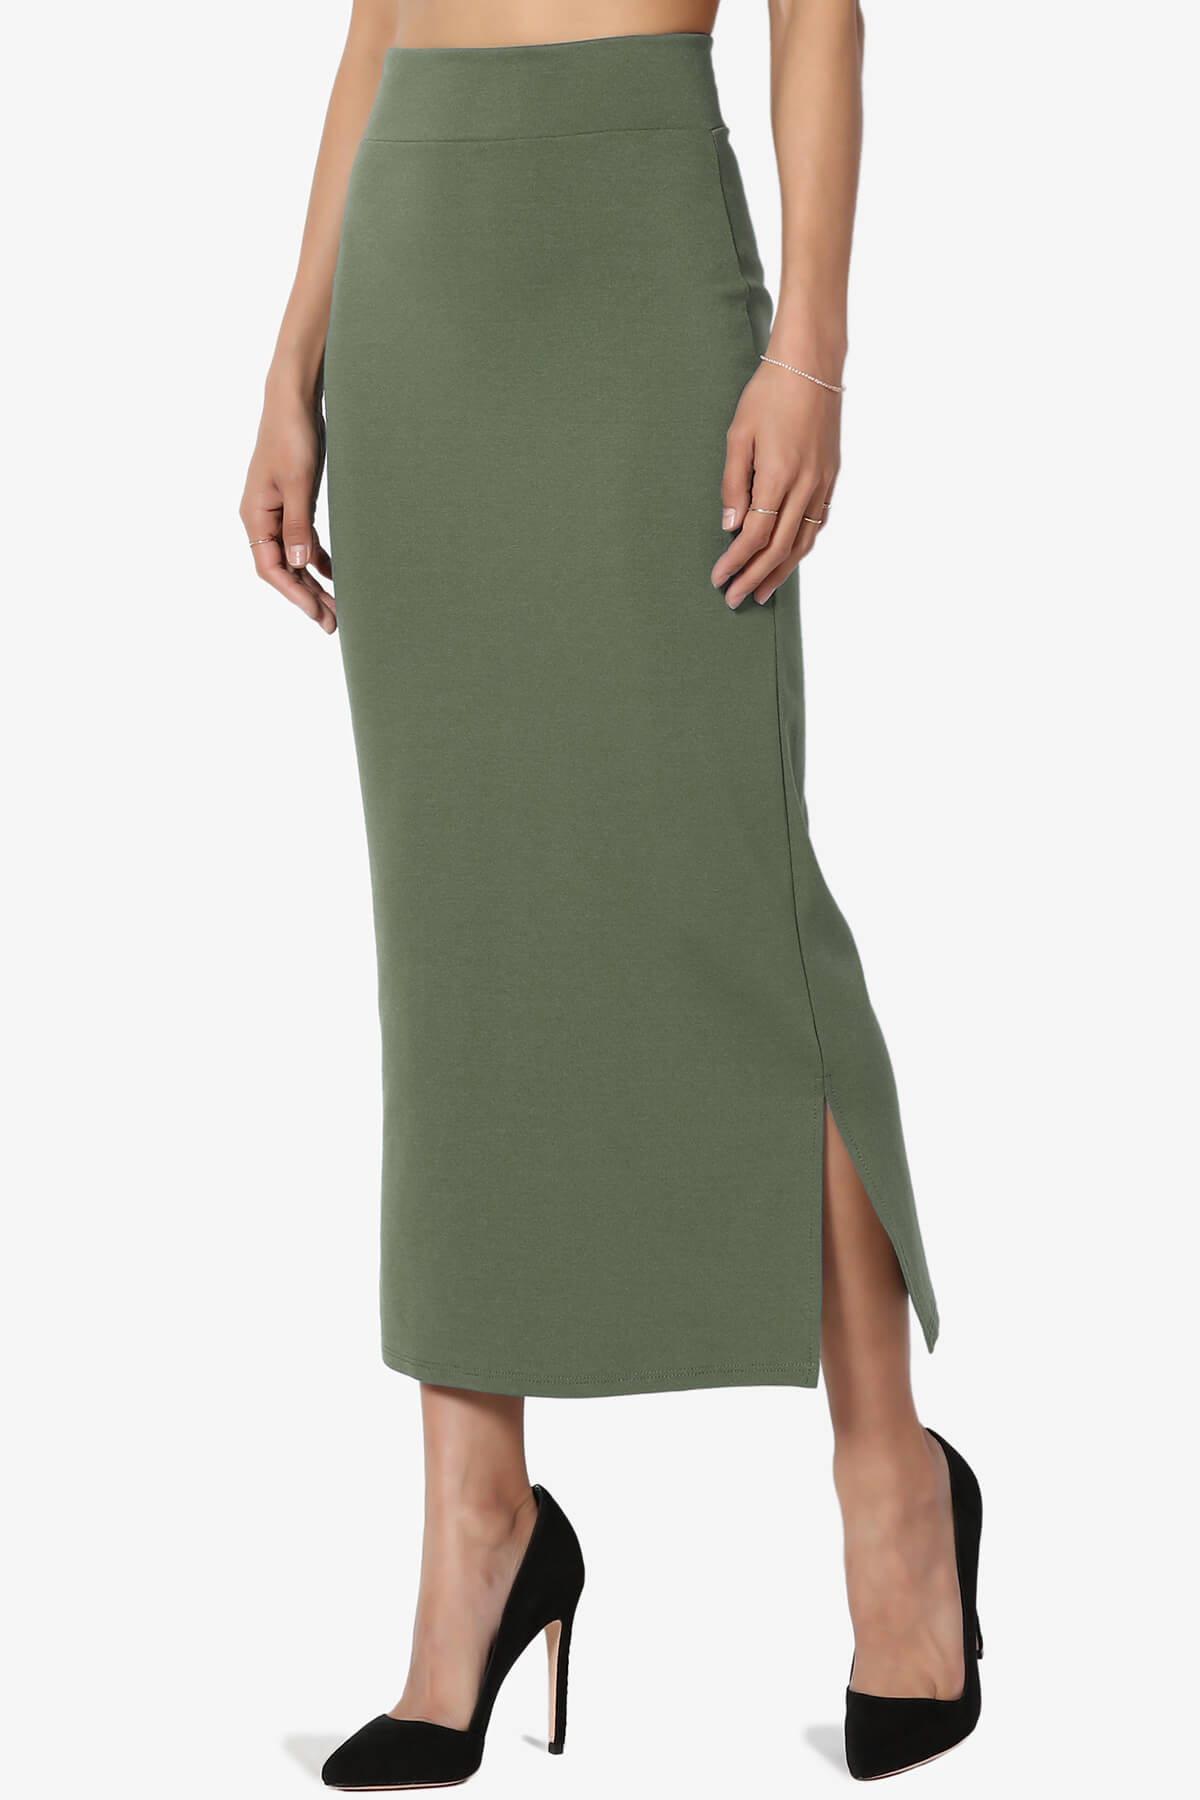 Load image into Gallery viewer, Carleta Mid Calf Pencil Skirt DUSTY OLIVE_3
